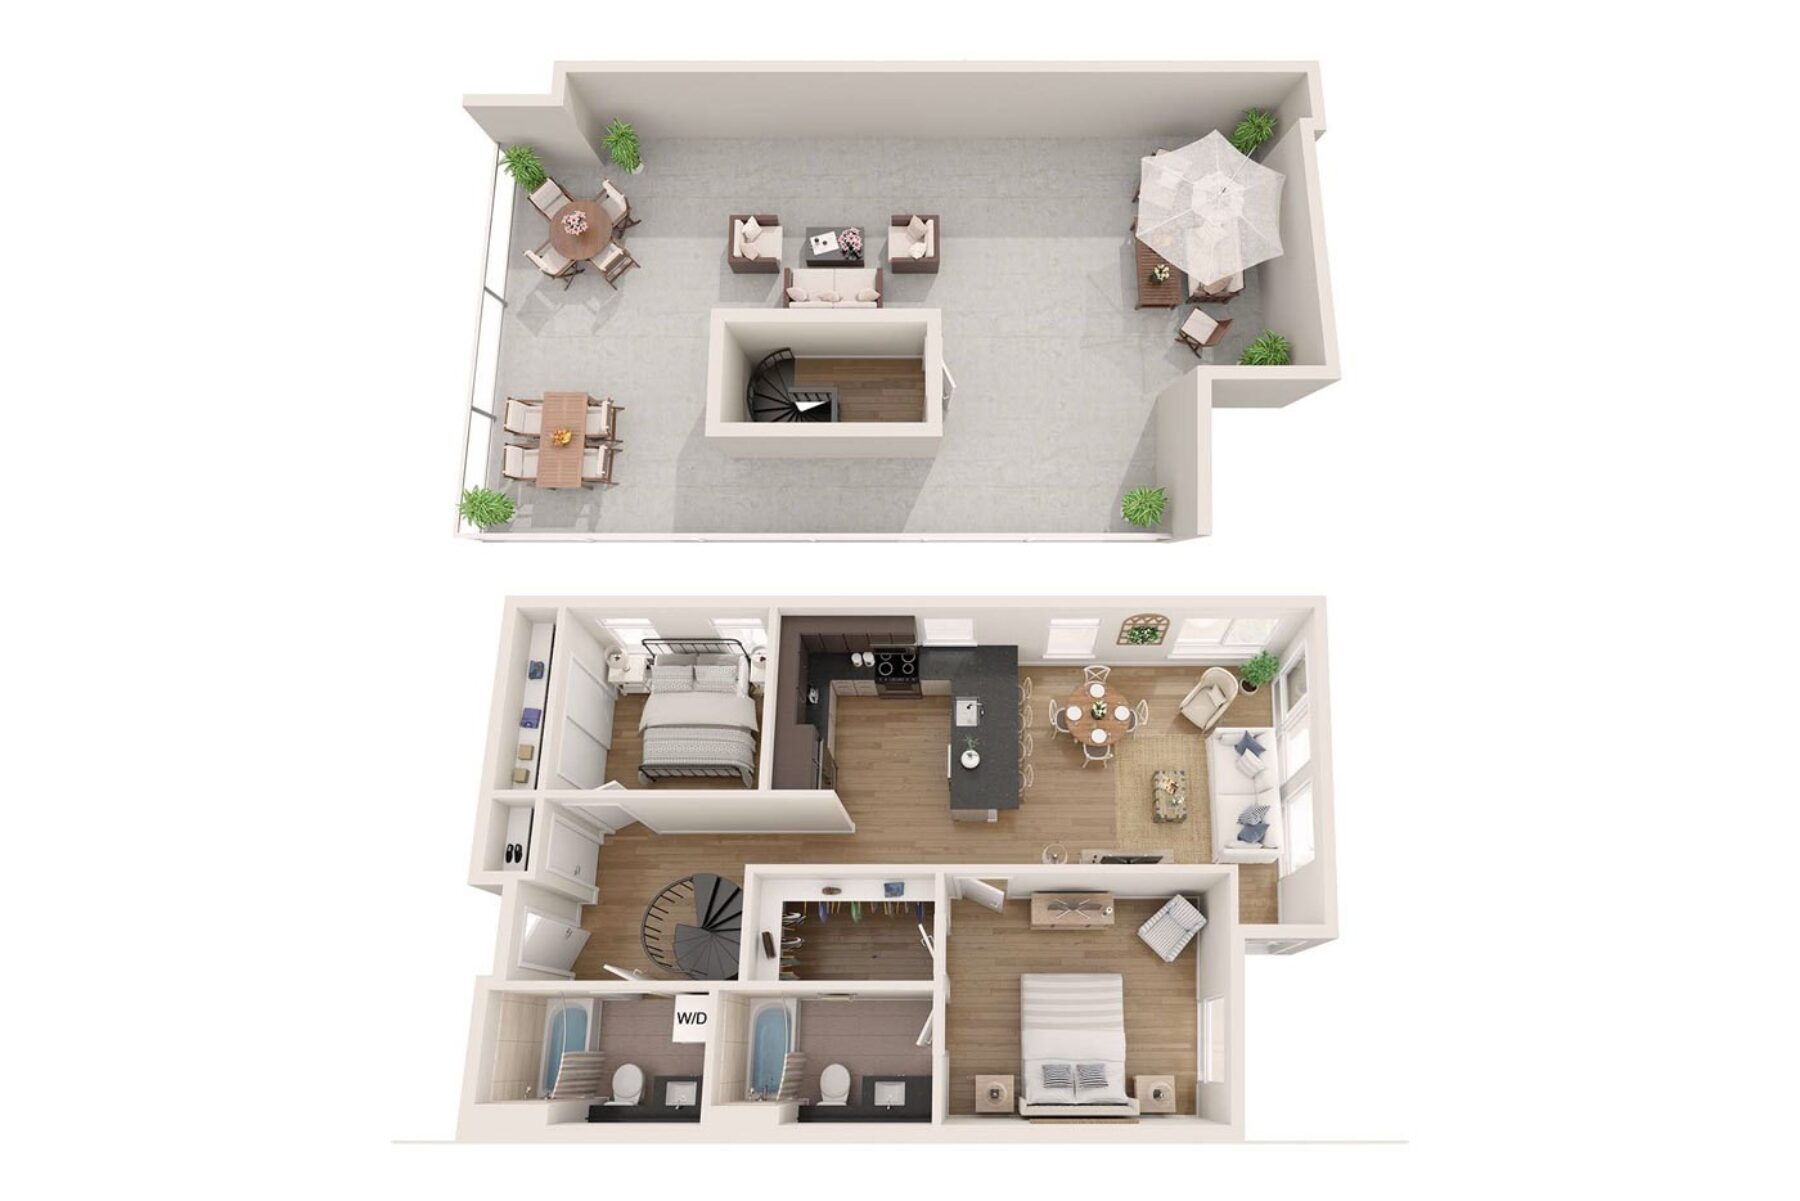 Plan Image: 2.1 - Two Bedroom w/ Balcony or Penthouse Deck